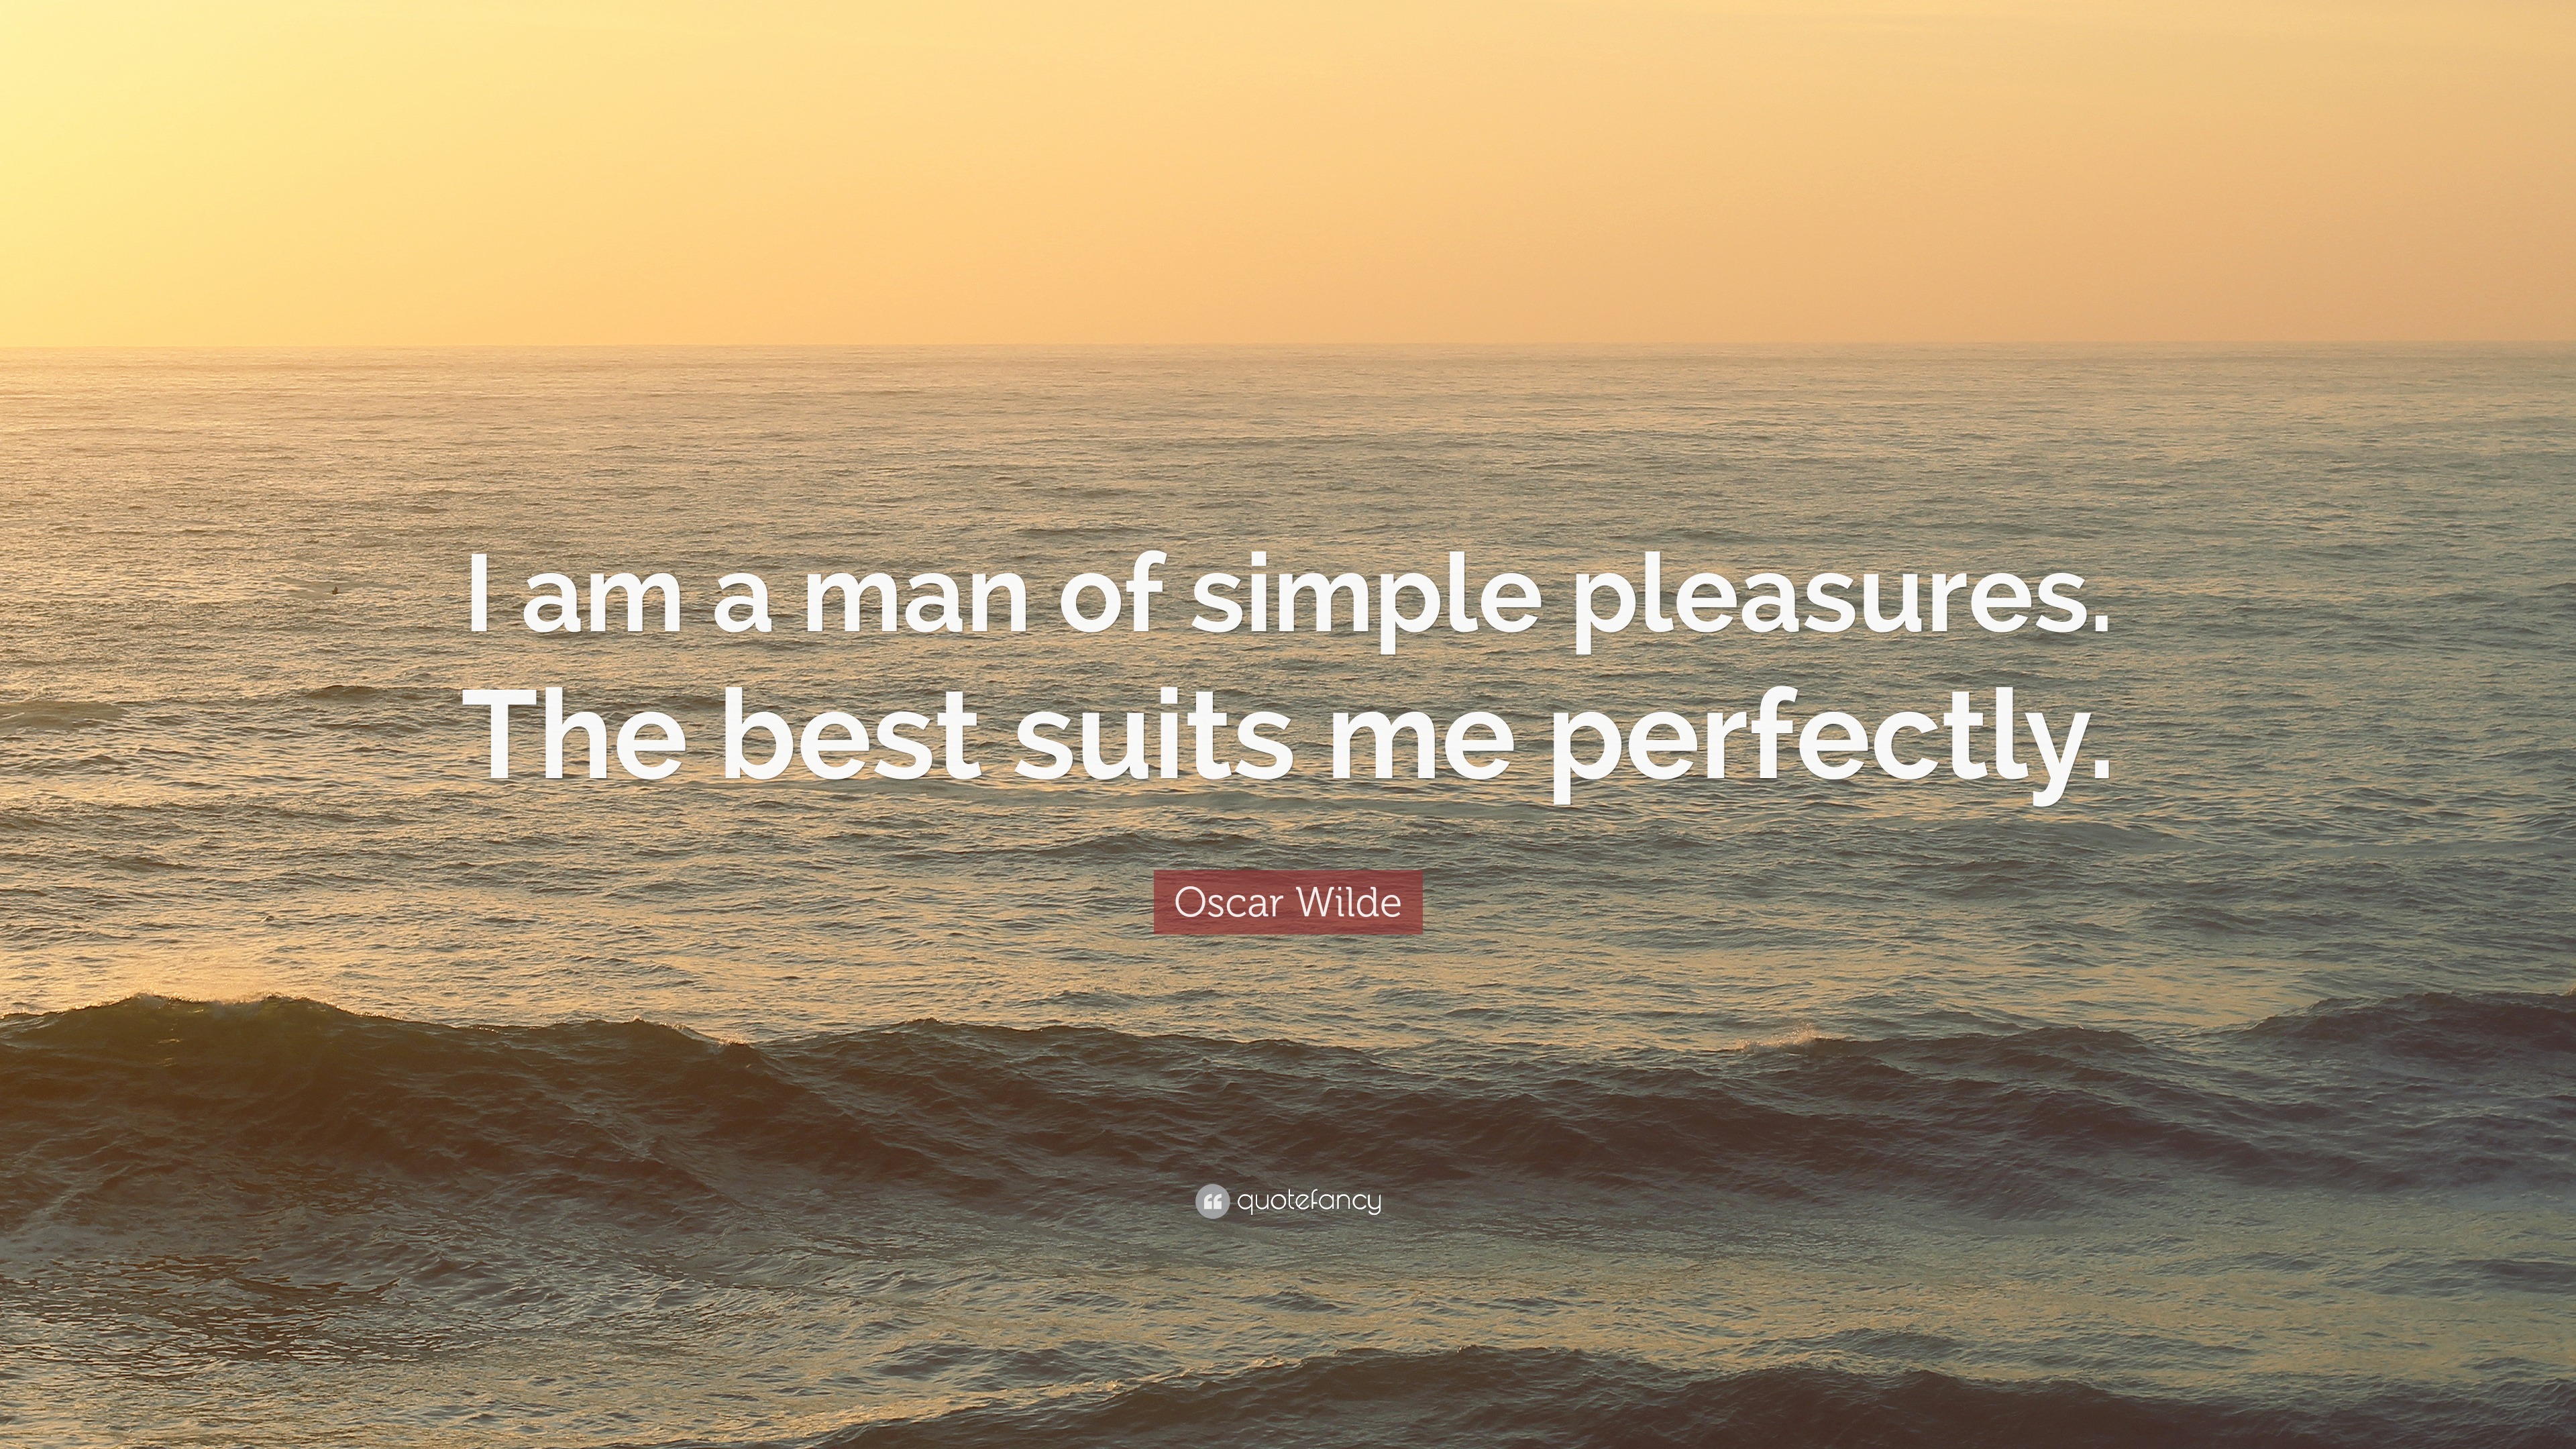 Oscar Wilde Quote: “I am a man of simple pleasures. The best suits me  perfectly.”